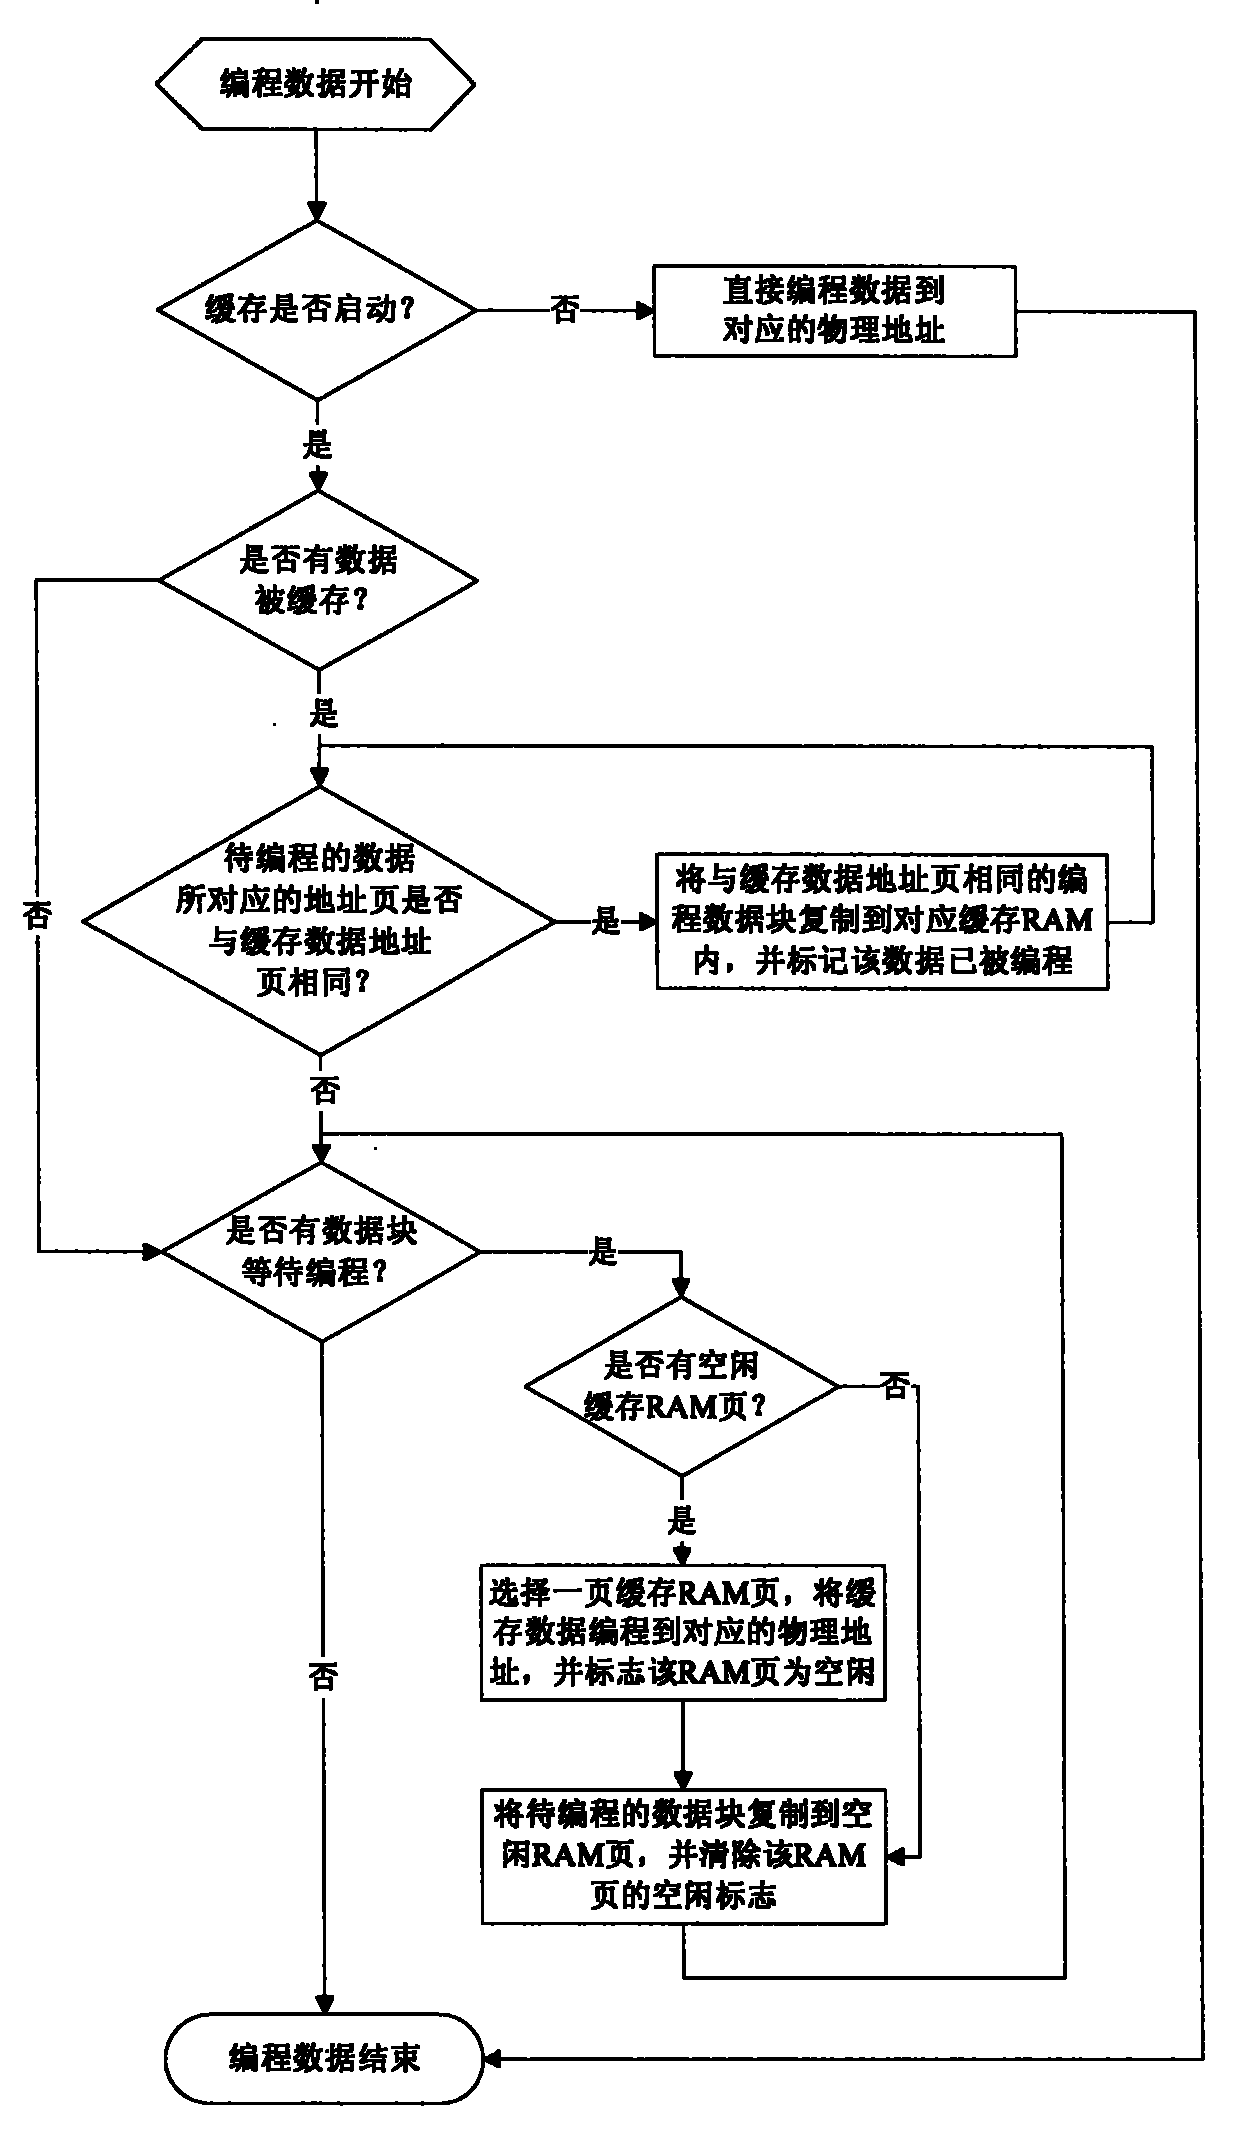 Method for performing read-write operation on programmable read-only memory with cache by JAVA card